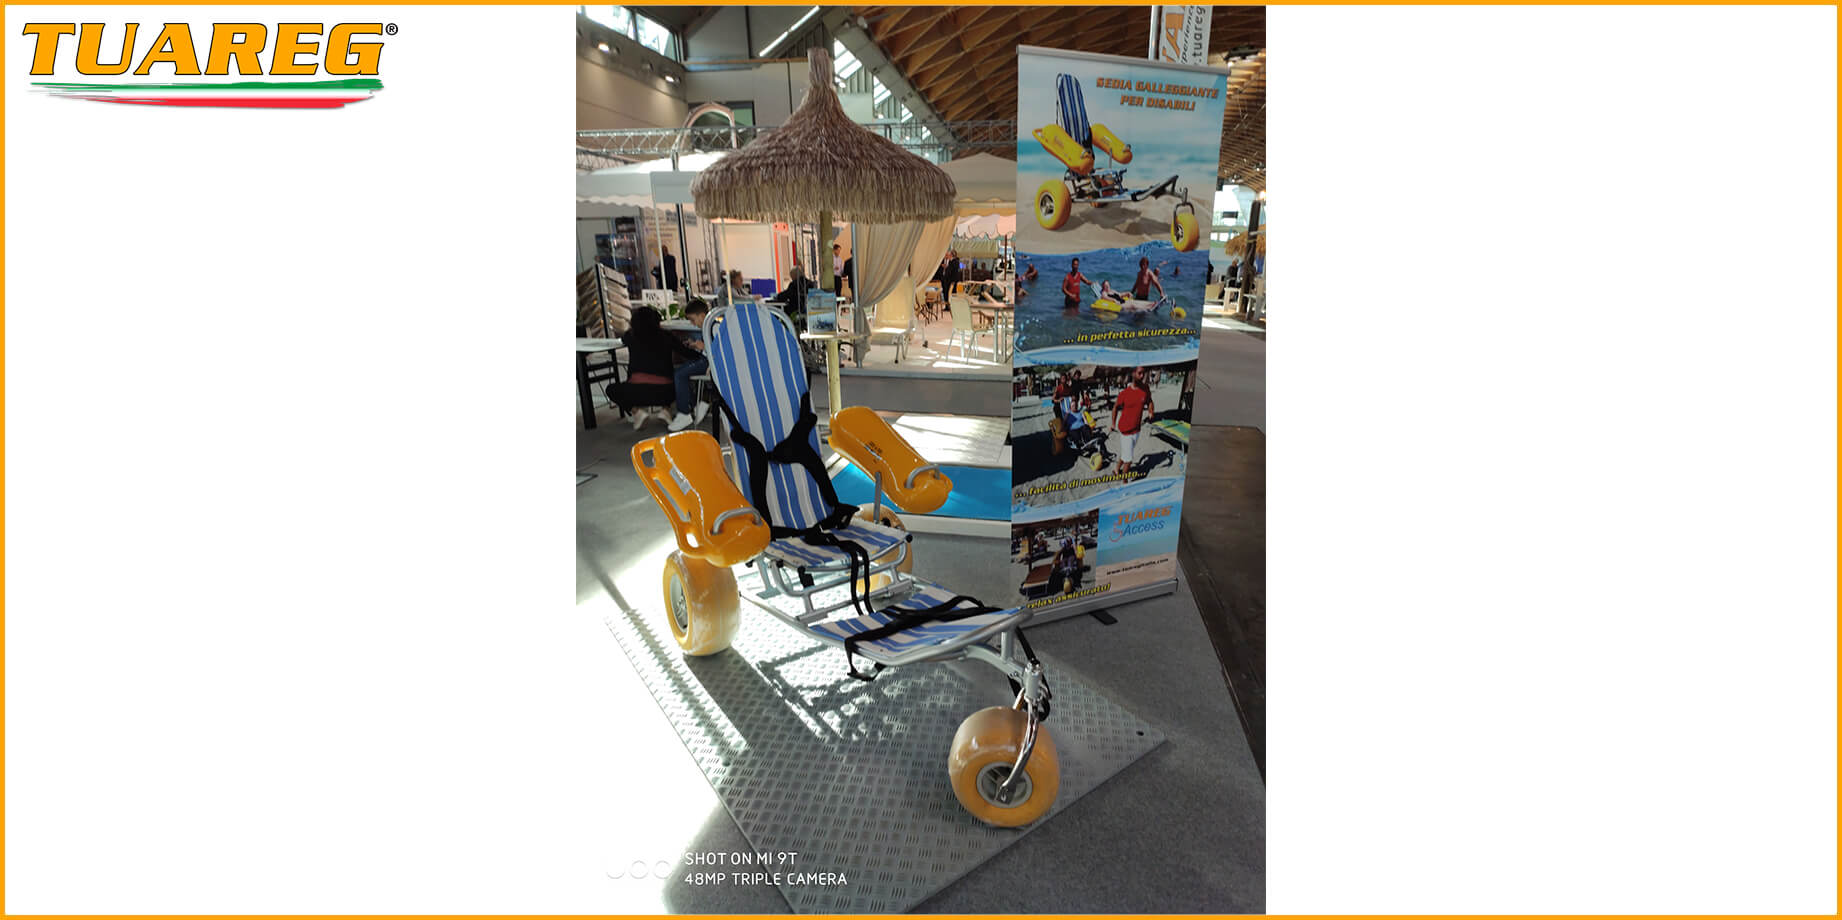 Float Chair by beach for disabled - Tuareg Access - Product/Accessory for Beach Accessibility